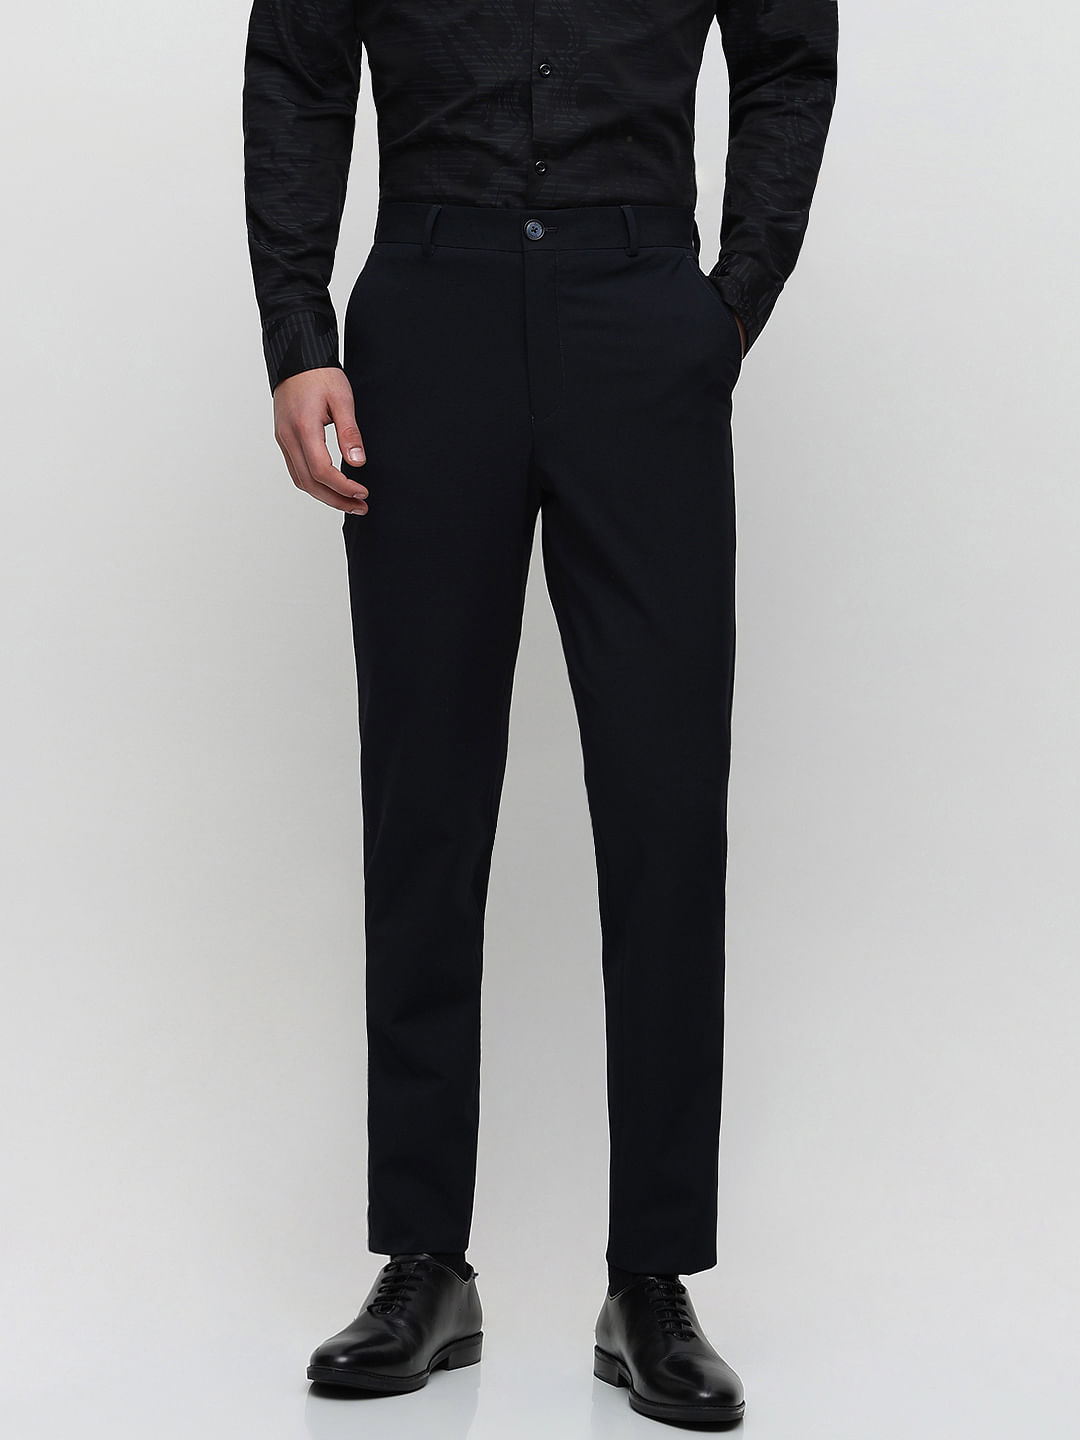 Men's Navy Tailored Flannel Suit Trousers - 1913 Collection | Hawes & Curtis